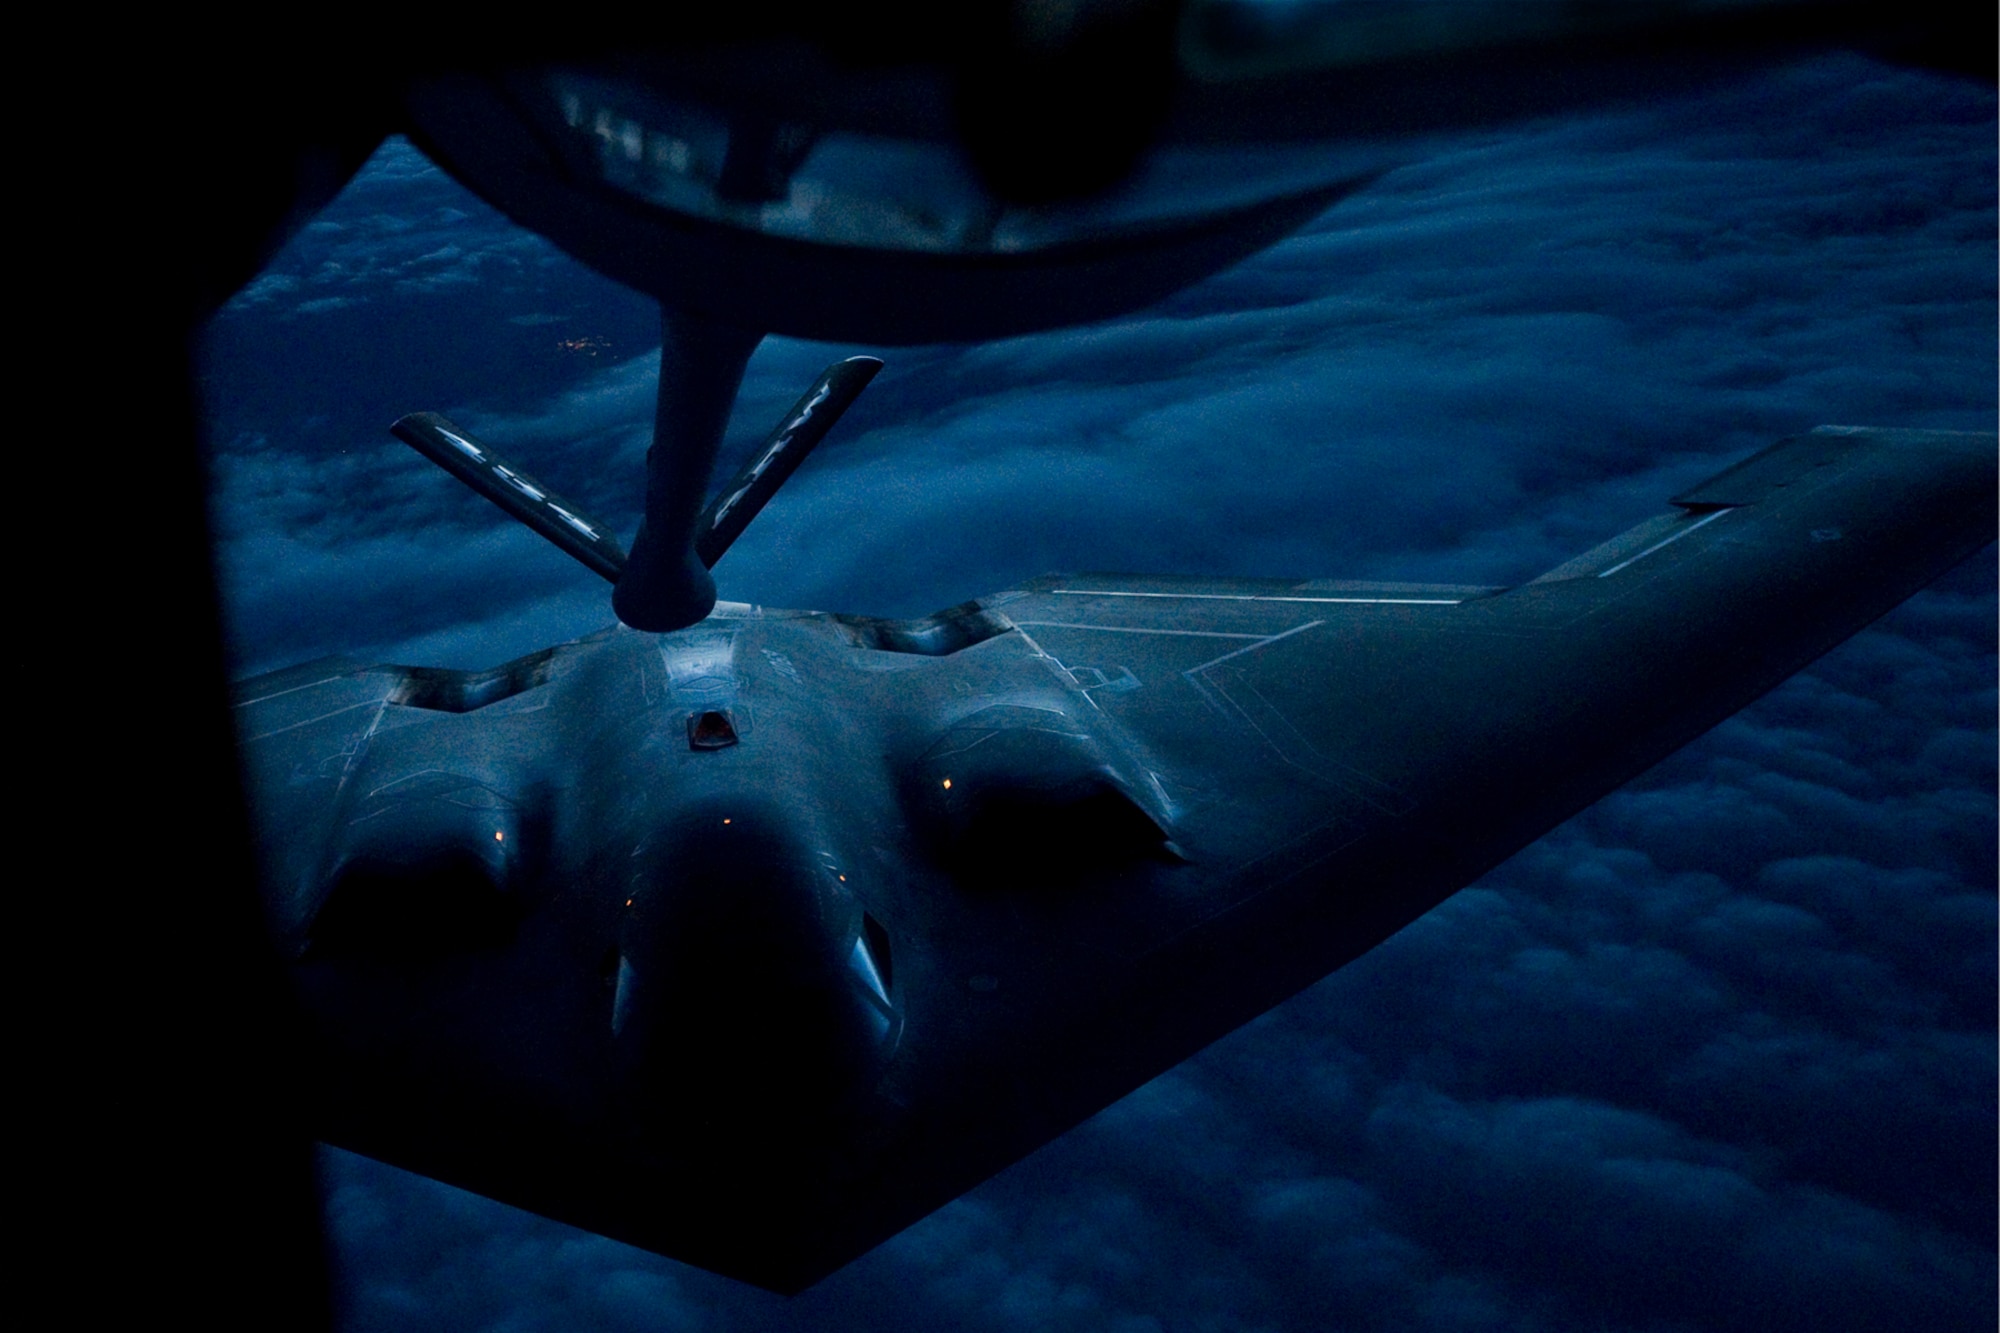 A B-2 Spirit from the 509th Bomb Wing, 13th Bomb Squadron Whiteman Air Force Base, Miss., prepares to be refueled by a KC-135R Stratotanker from the 434th Air Refueling Wing at Grissom Air Reserve Base, Ind. during a nighttime aerial refueling mission over Southern Kansas, Oct. 21, 2015. The KC-135 has a system of exterior lights located on the belly of the aircraft, just behind the nose gear, and flood lights on the boom pod used to pass fuel to the receiver aircraft during low-light conditions.